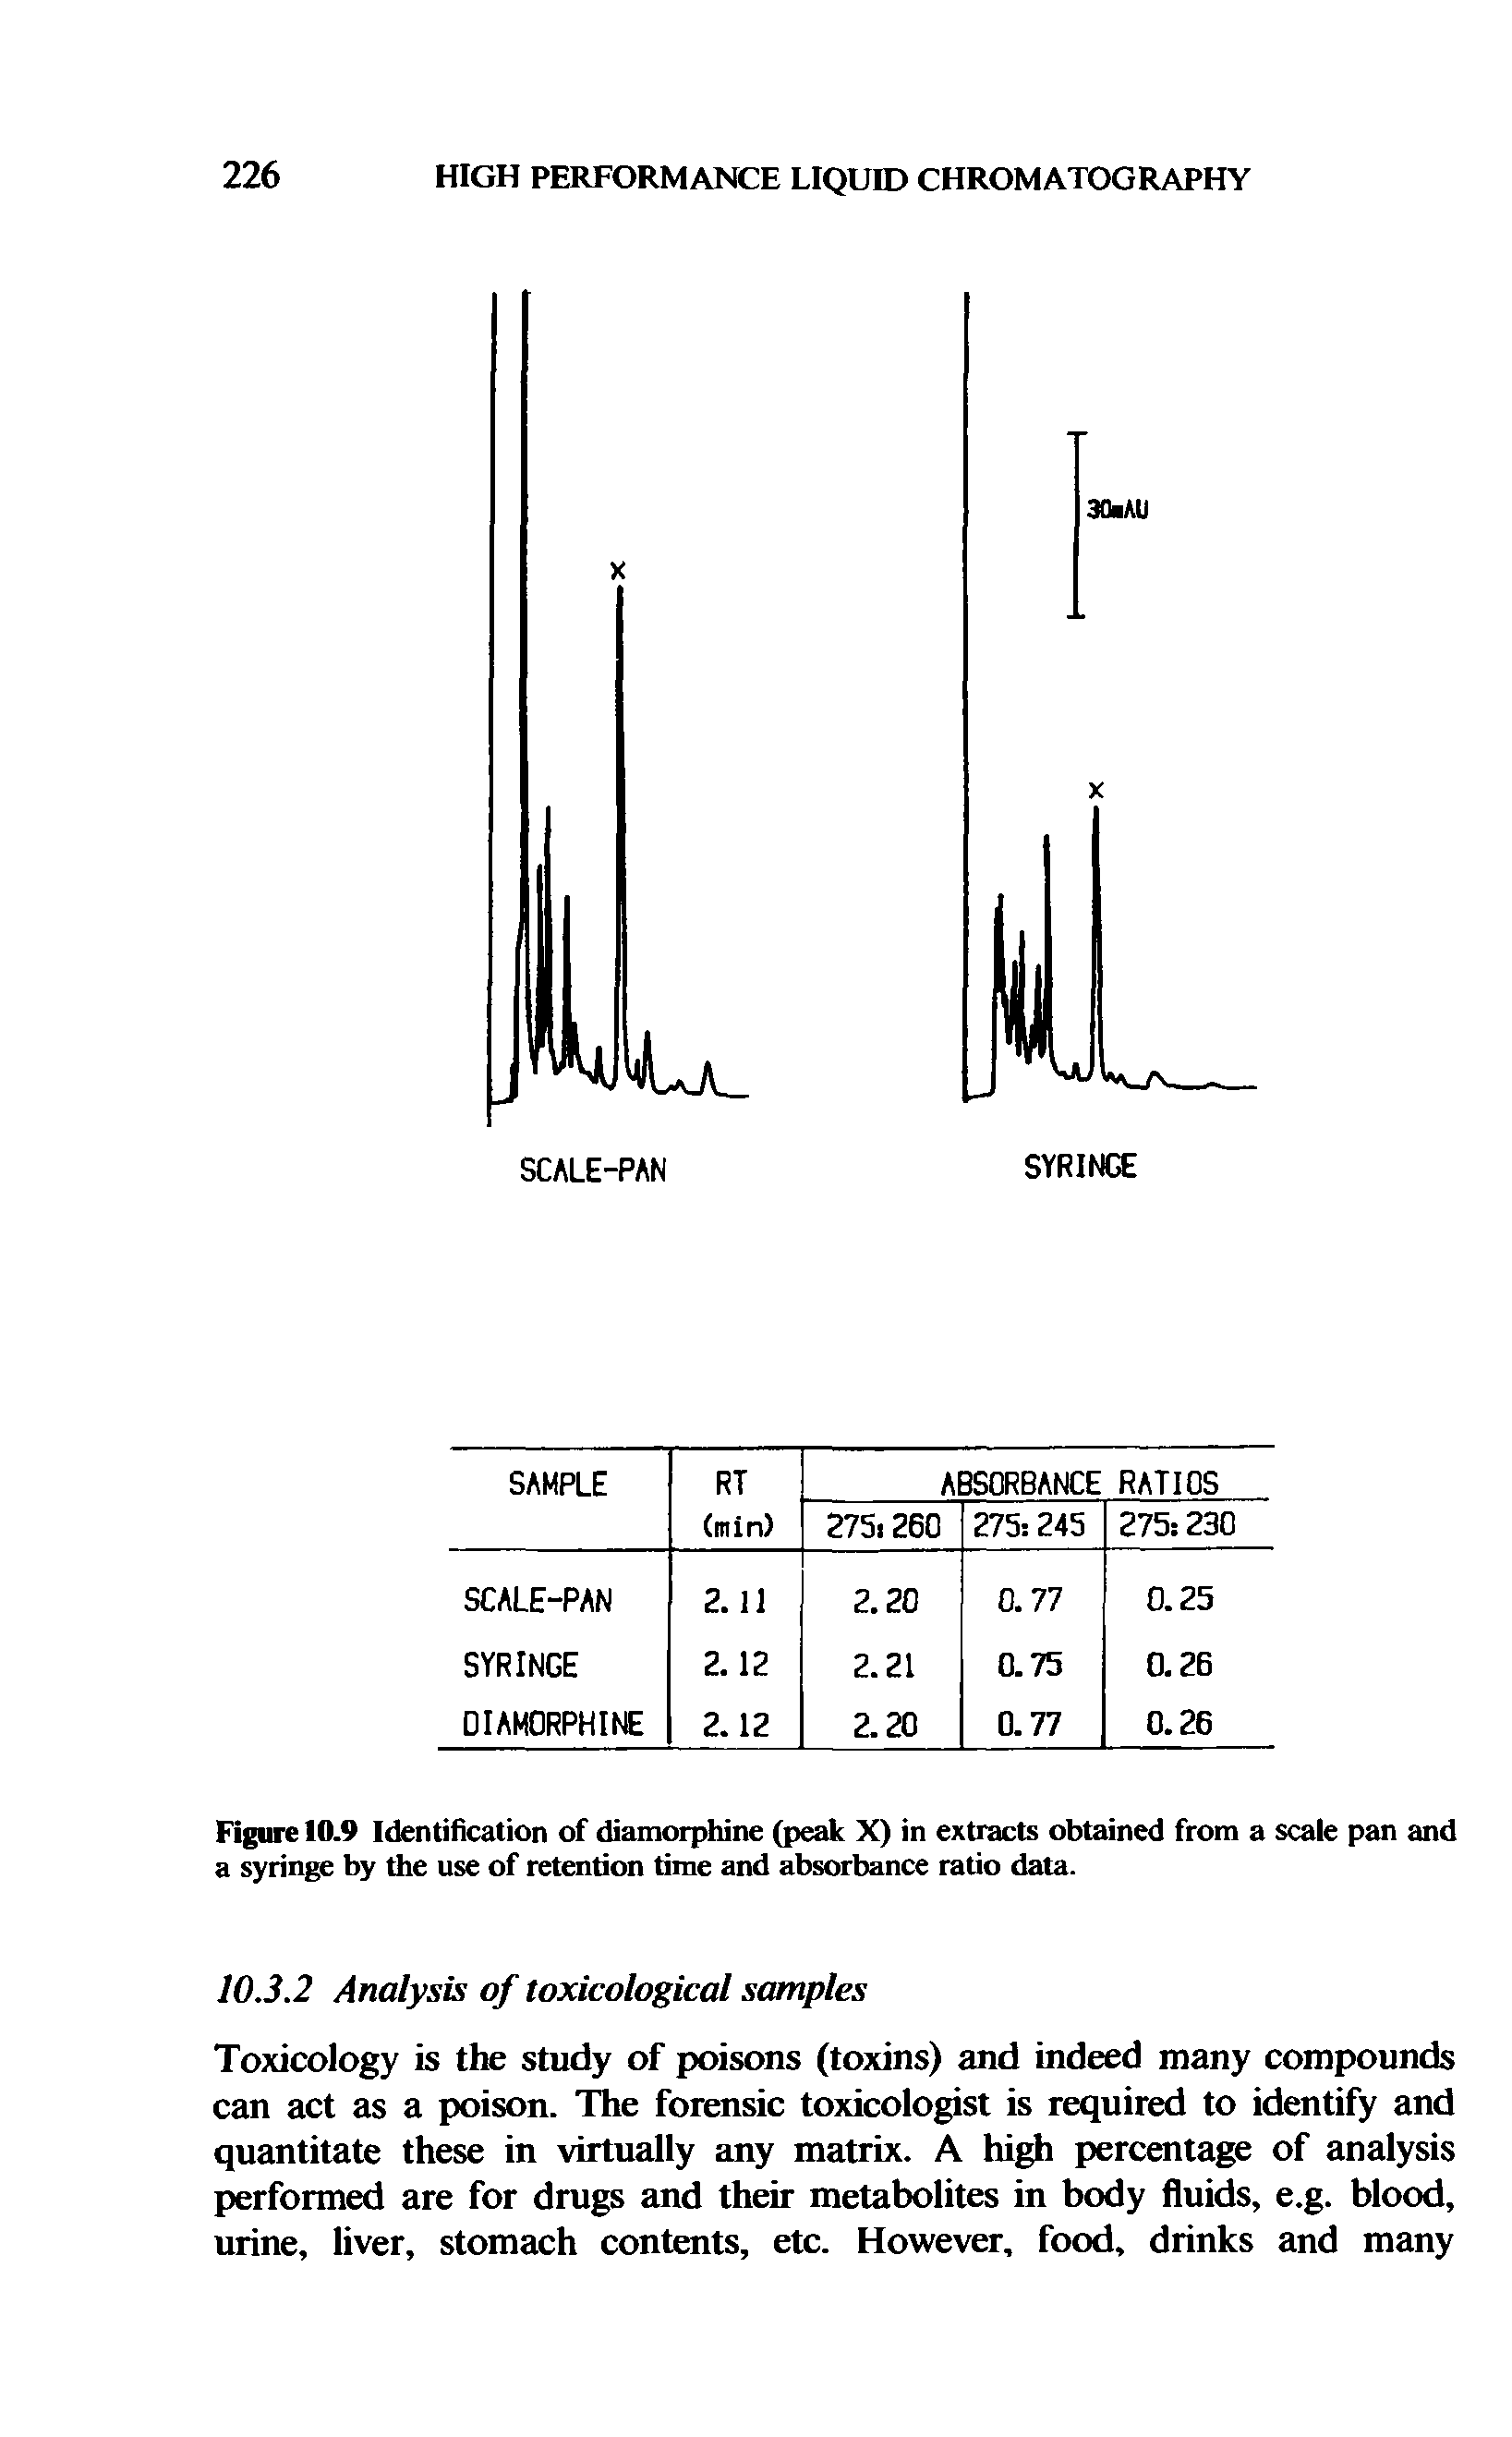 Figure 10.9 Identification of diamorphine (peak X) in extracts obtained from a scale pan and a syringe by the use of retention time and absorbance ratio data.